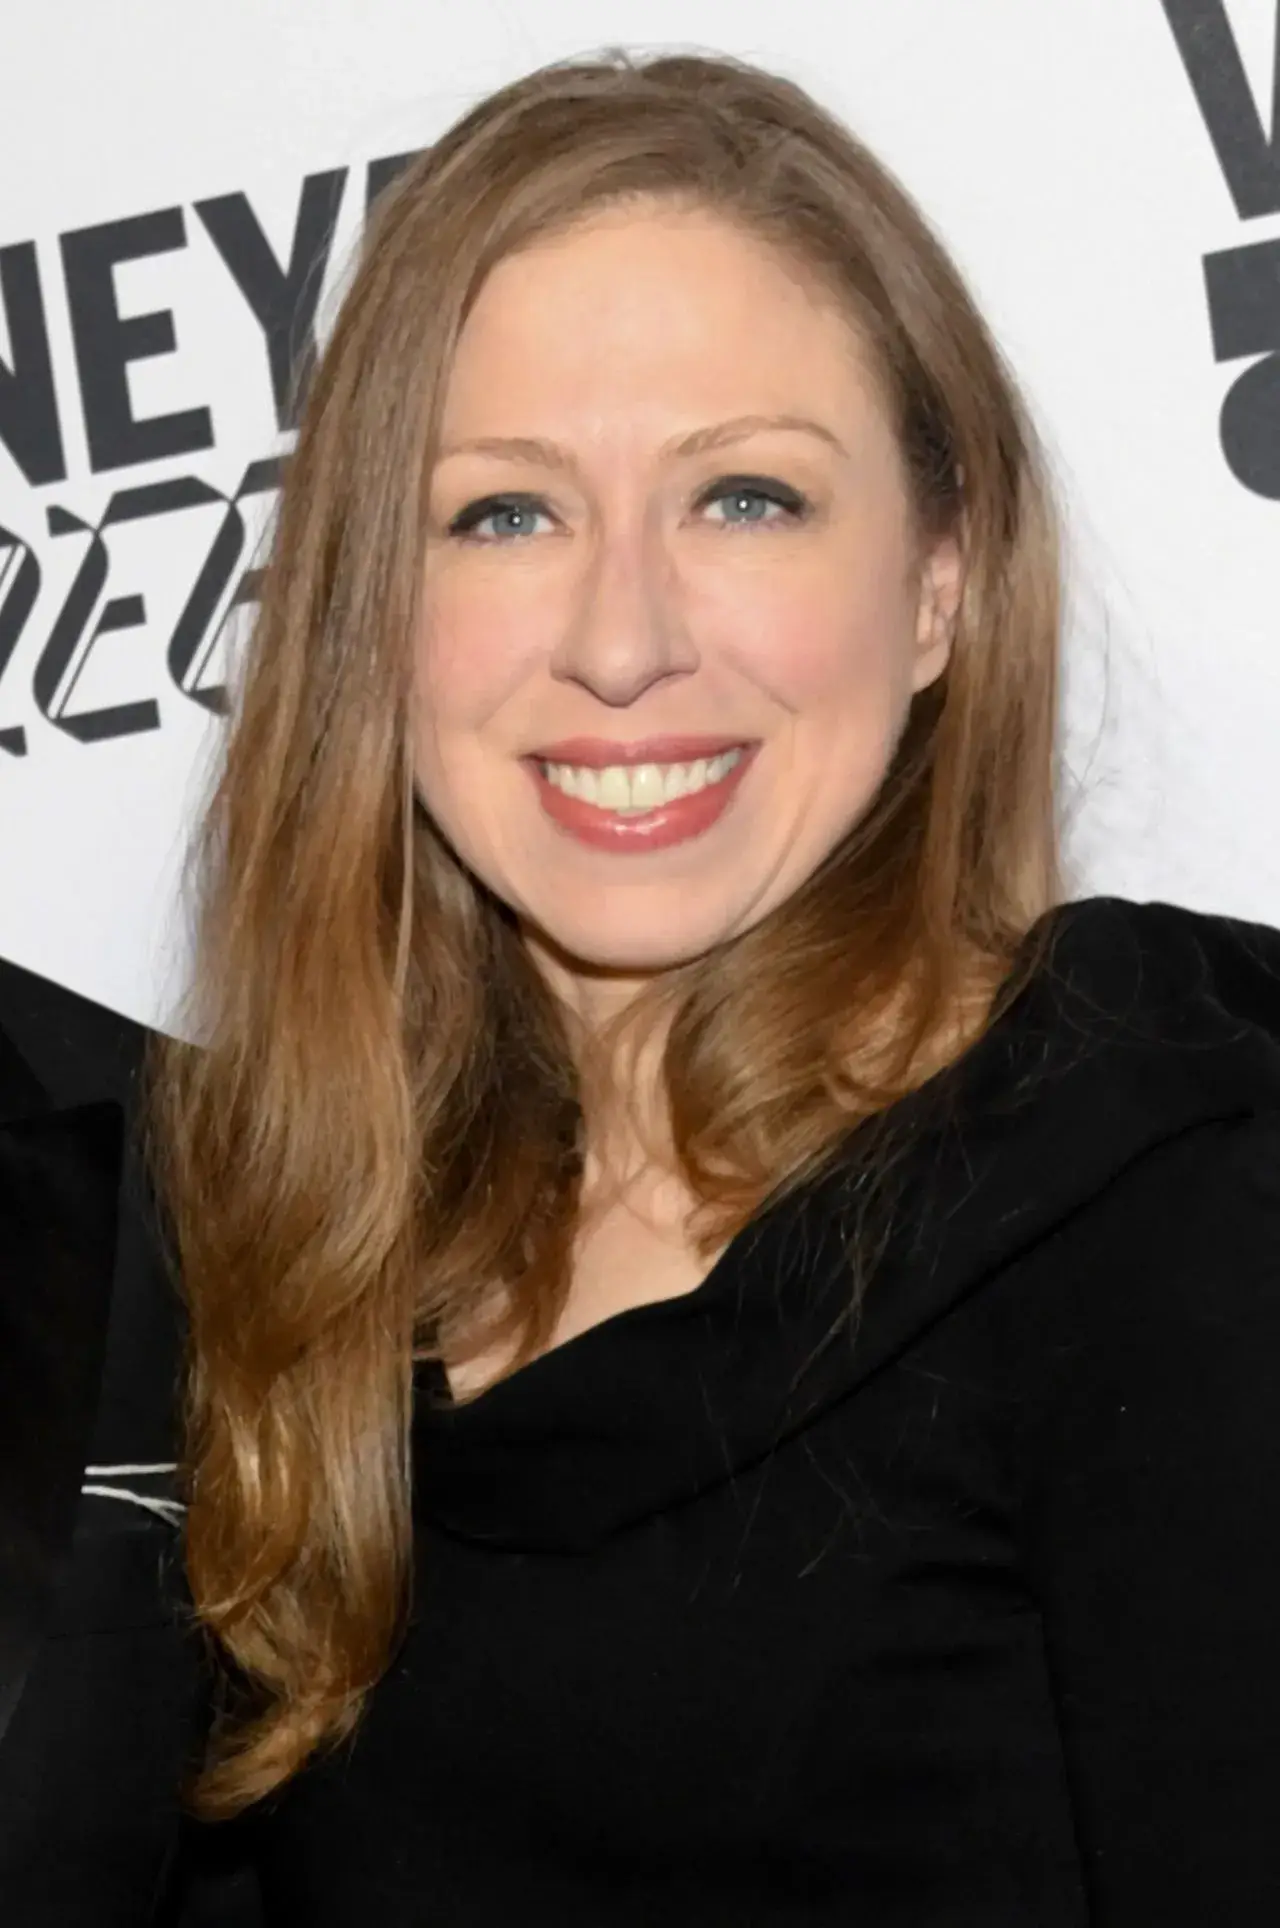 CHELSEA CLINTON PHOTOSHOOT AT VINEYARD THEATRE ANNUAL GALA IN NEW YORK